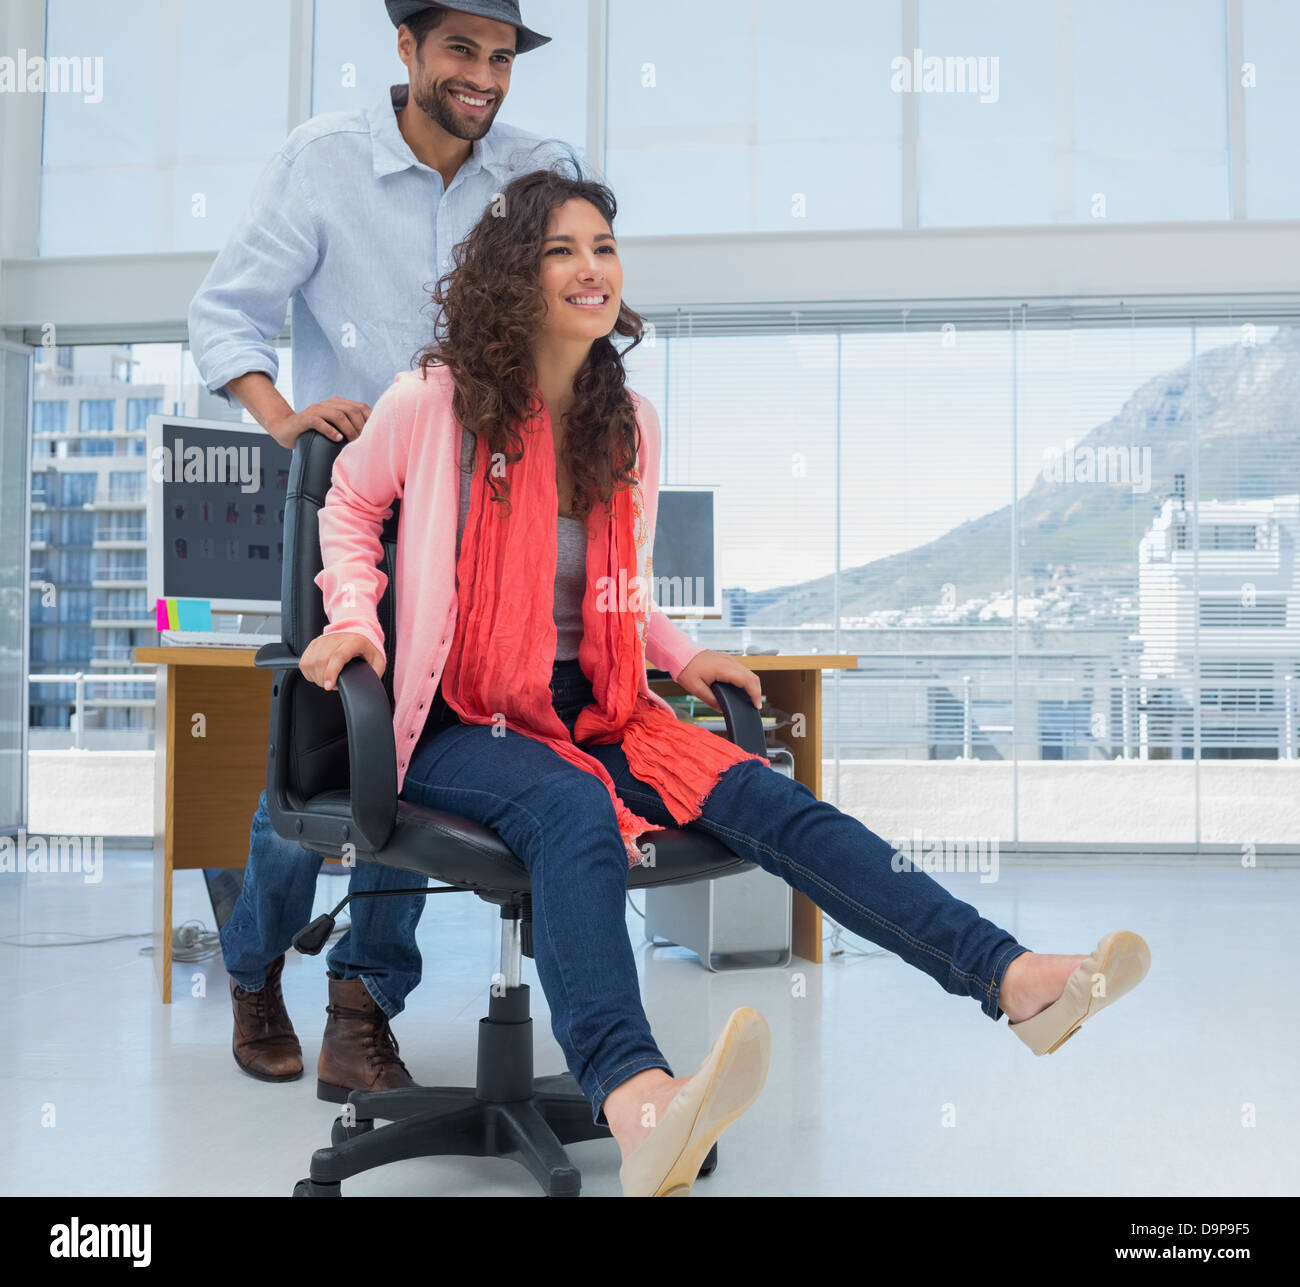 Creative business colleagues having fun on an office chair Stock Photo